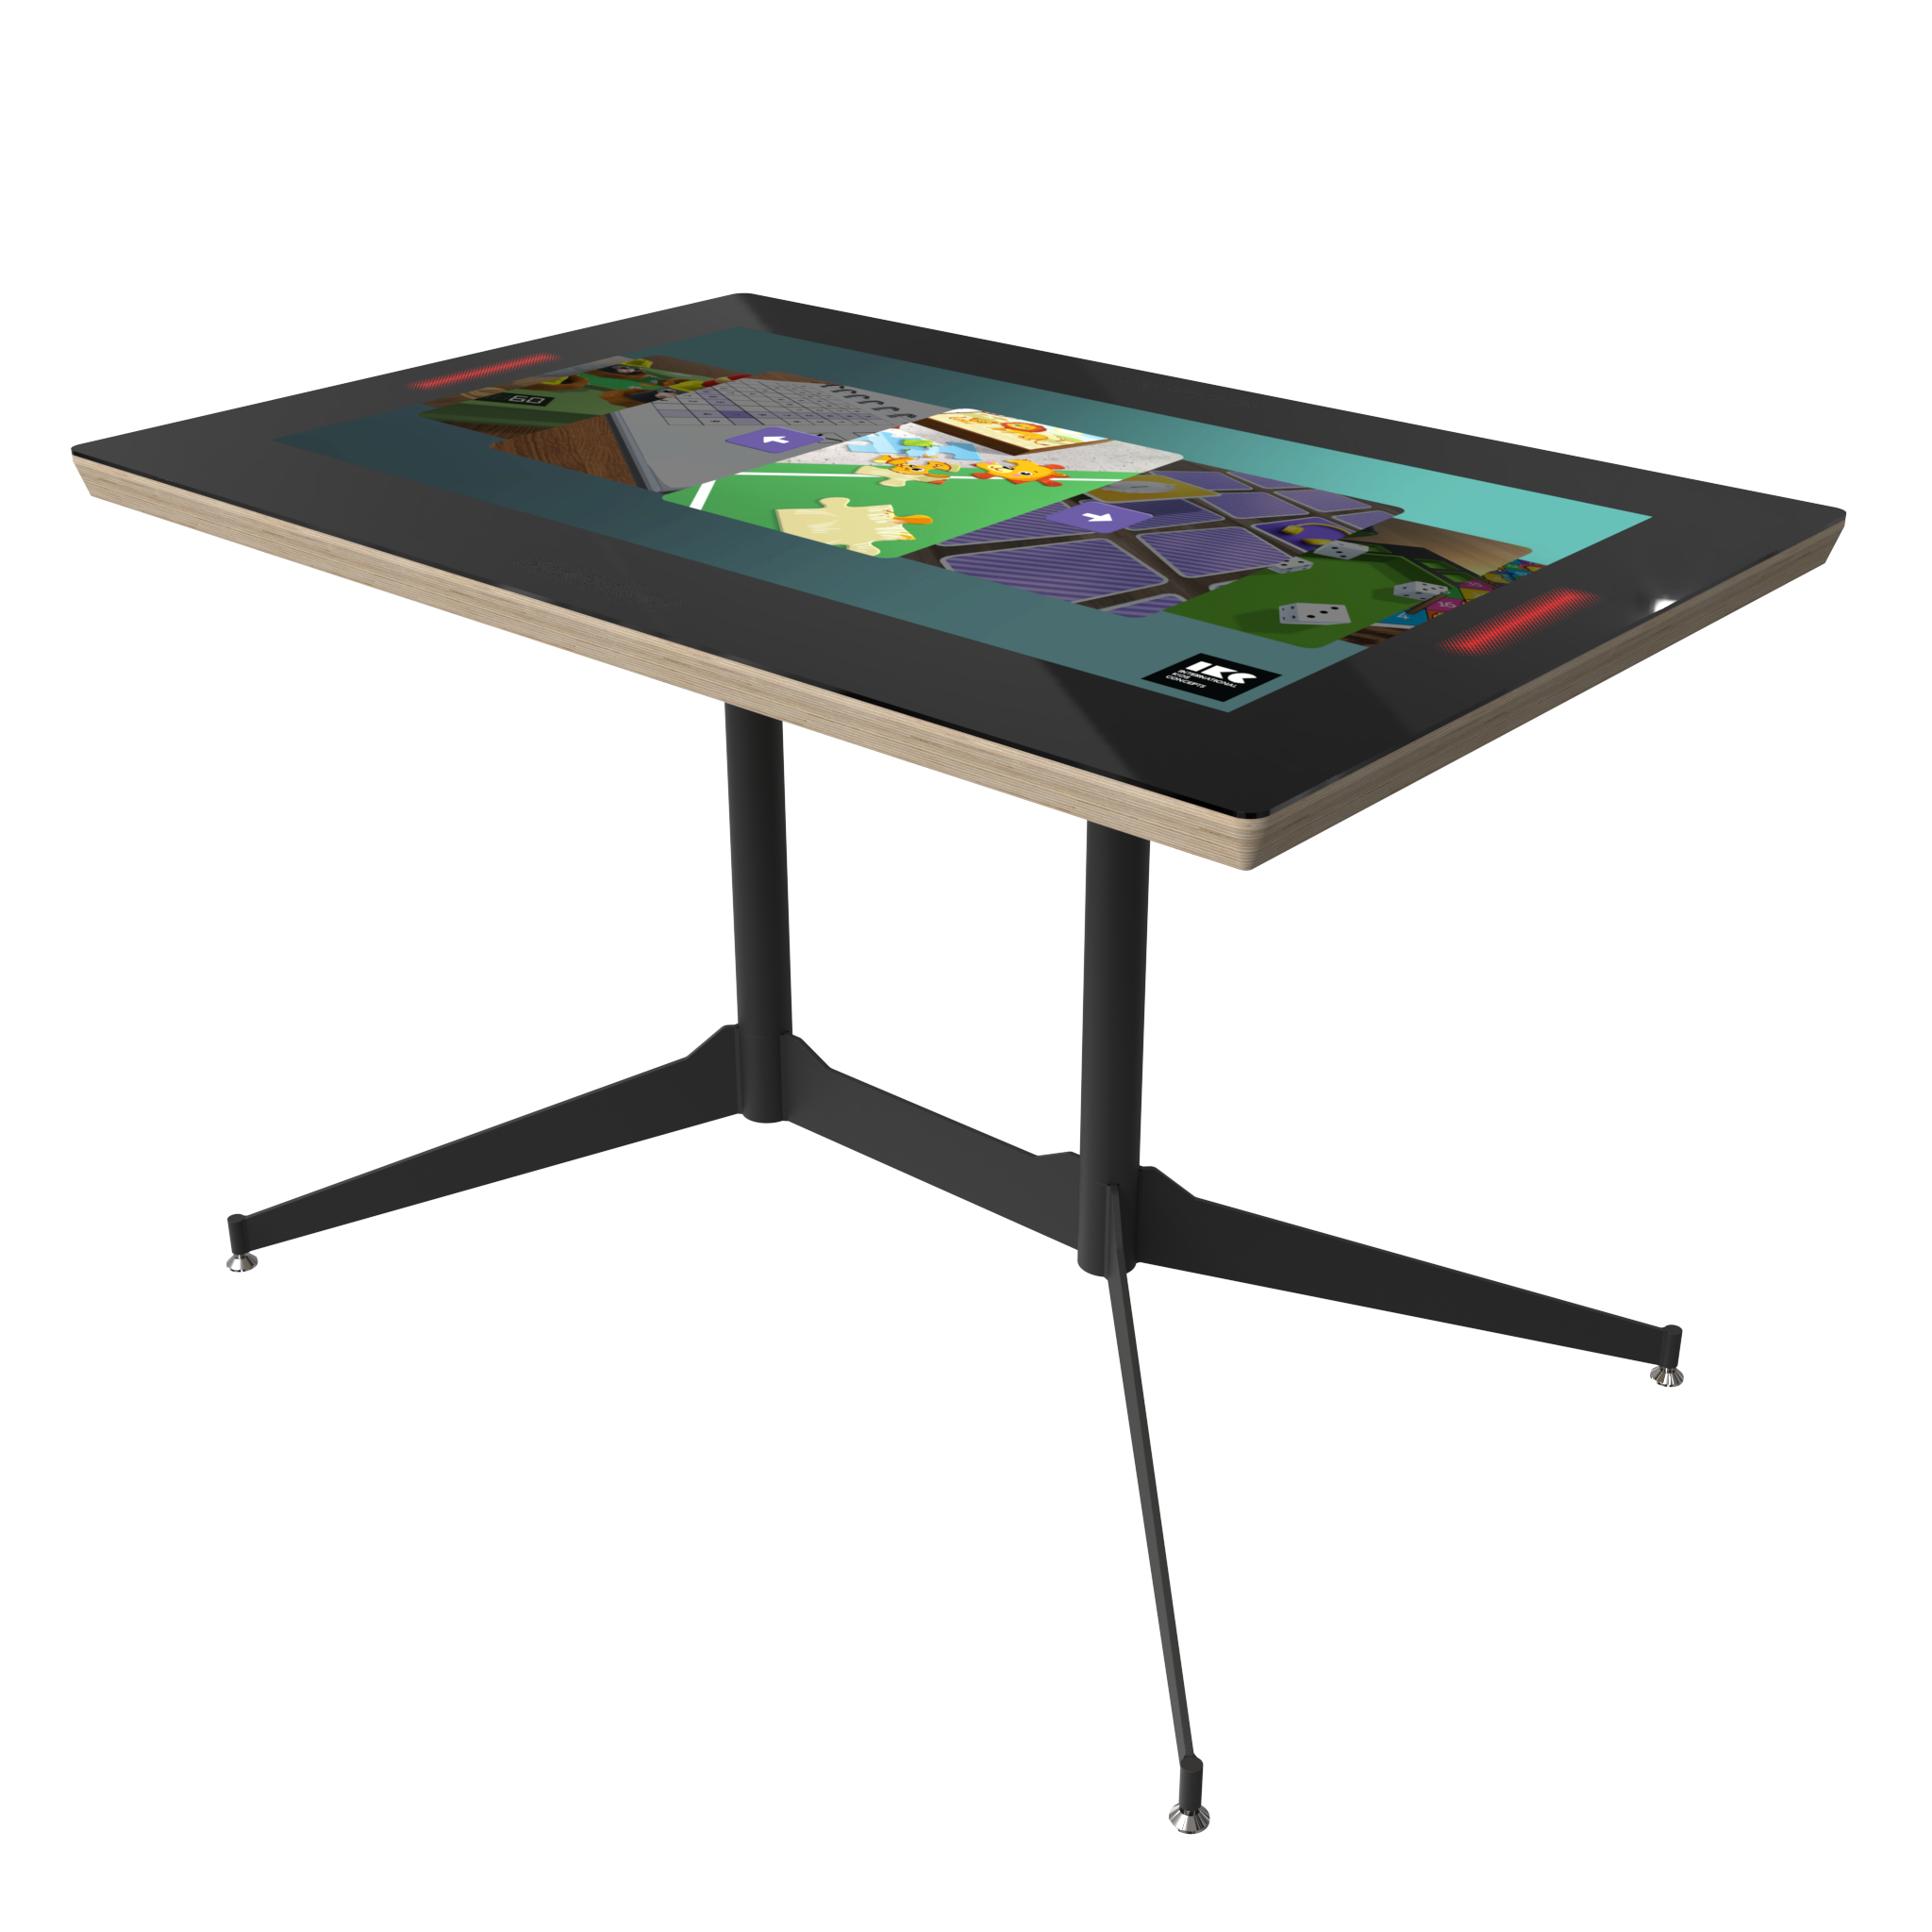 IKC collection I An interactive play table, fun for the whole family